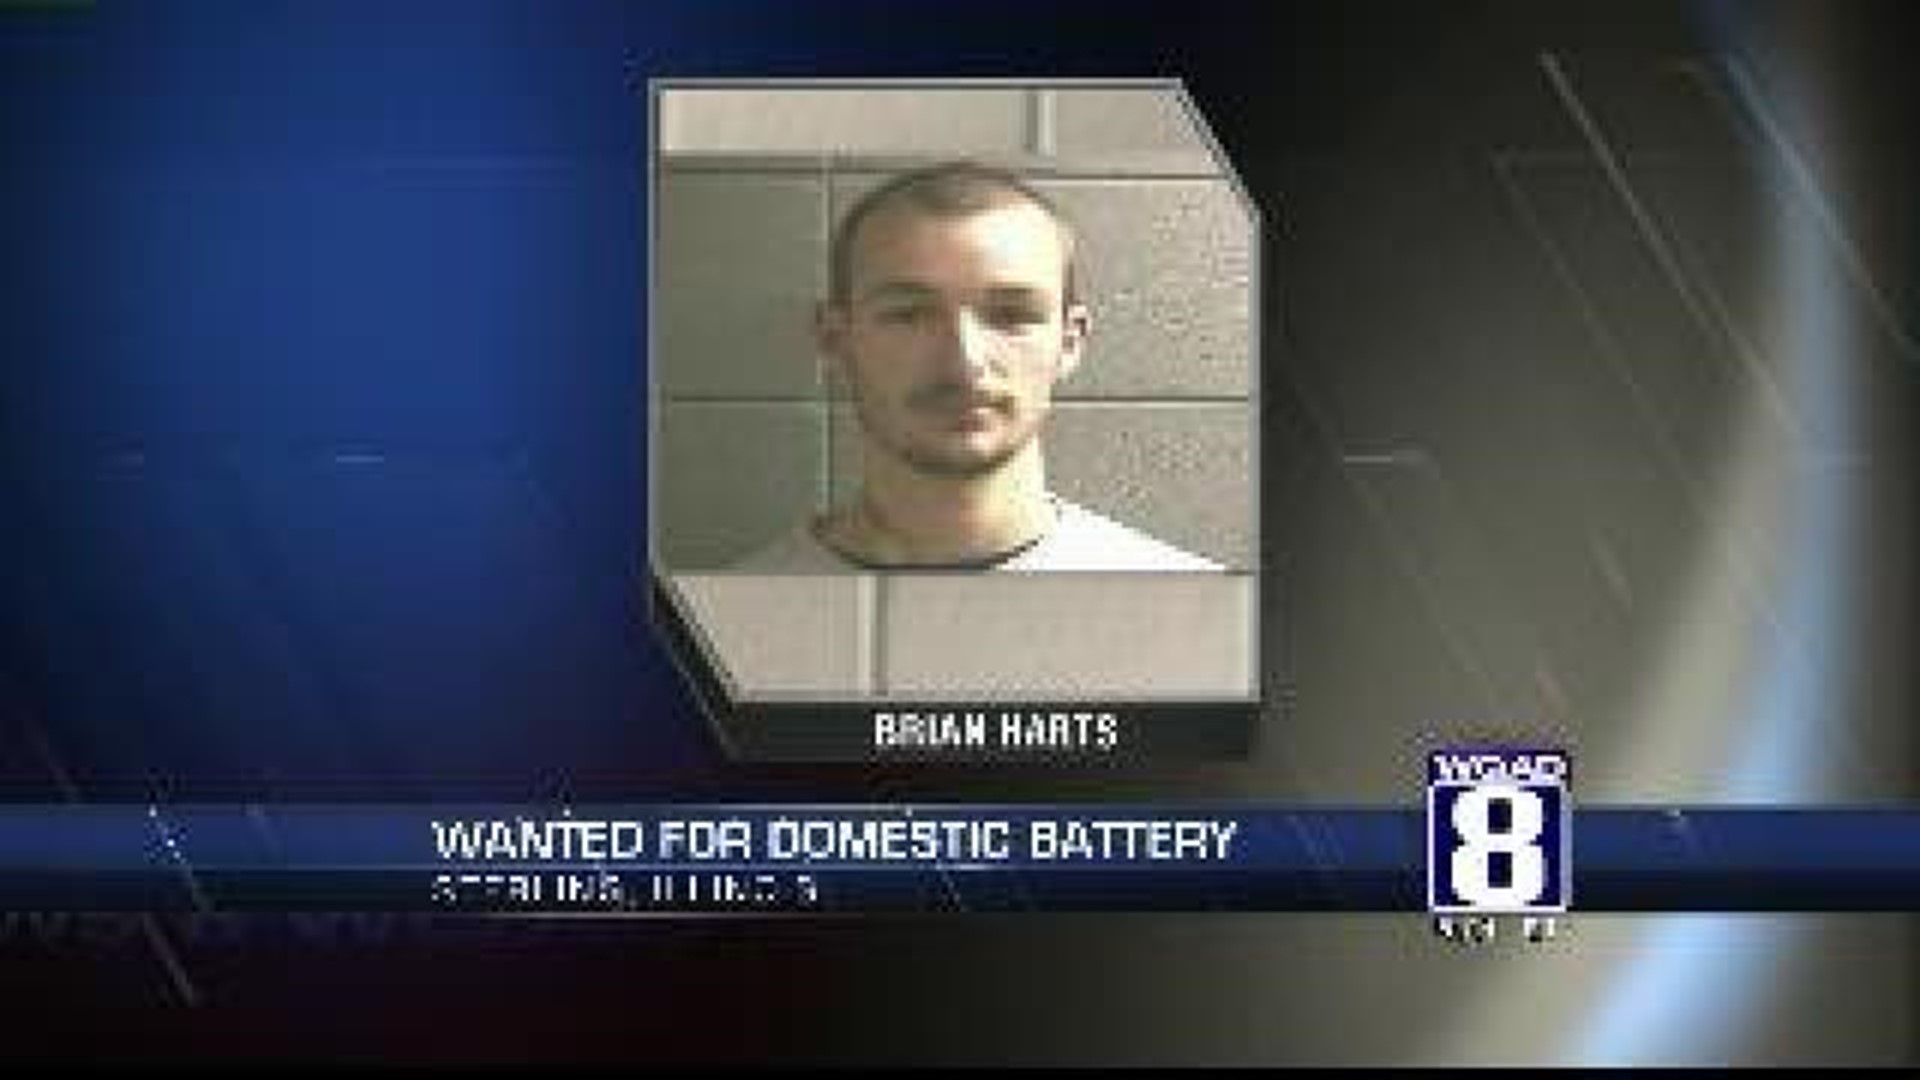 Sterling Police searching for man wanted for domestic battery